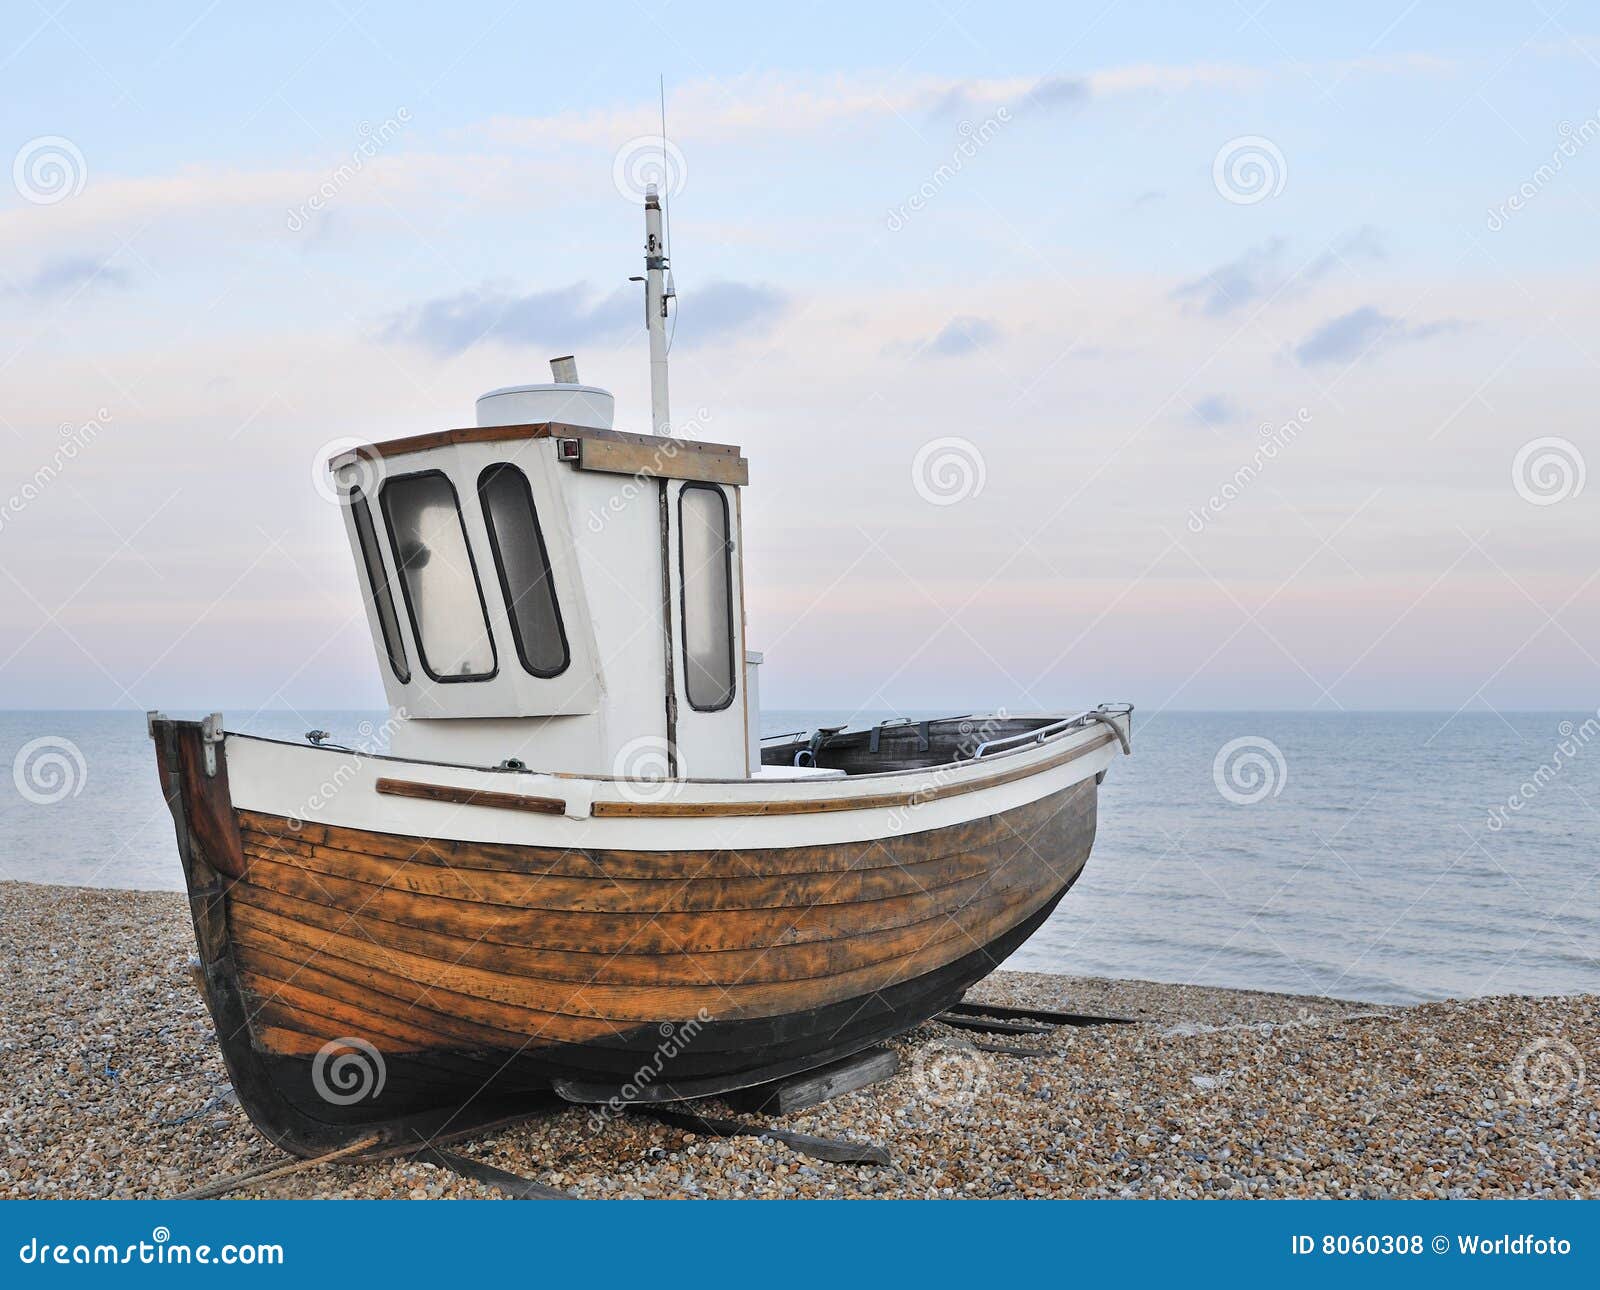 85,406 Wooden Fishing Boat Stock Photos - Free & Royalty-Free